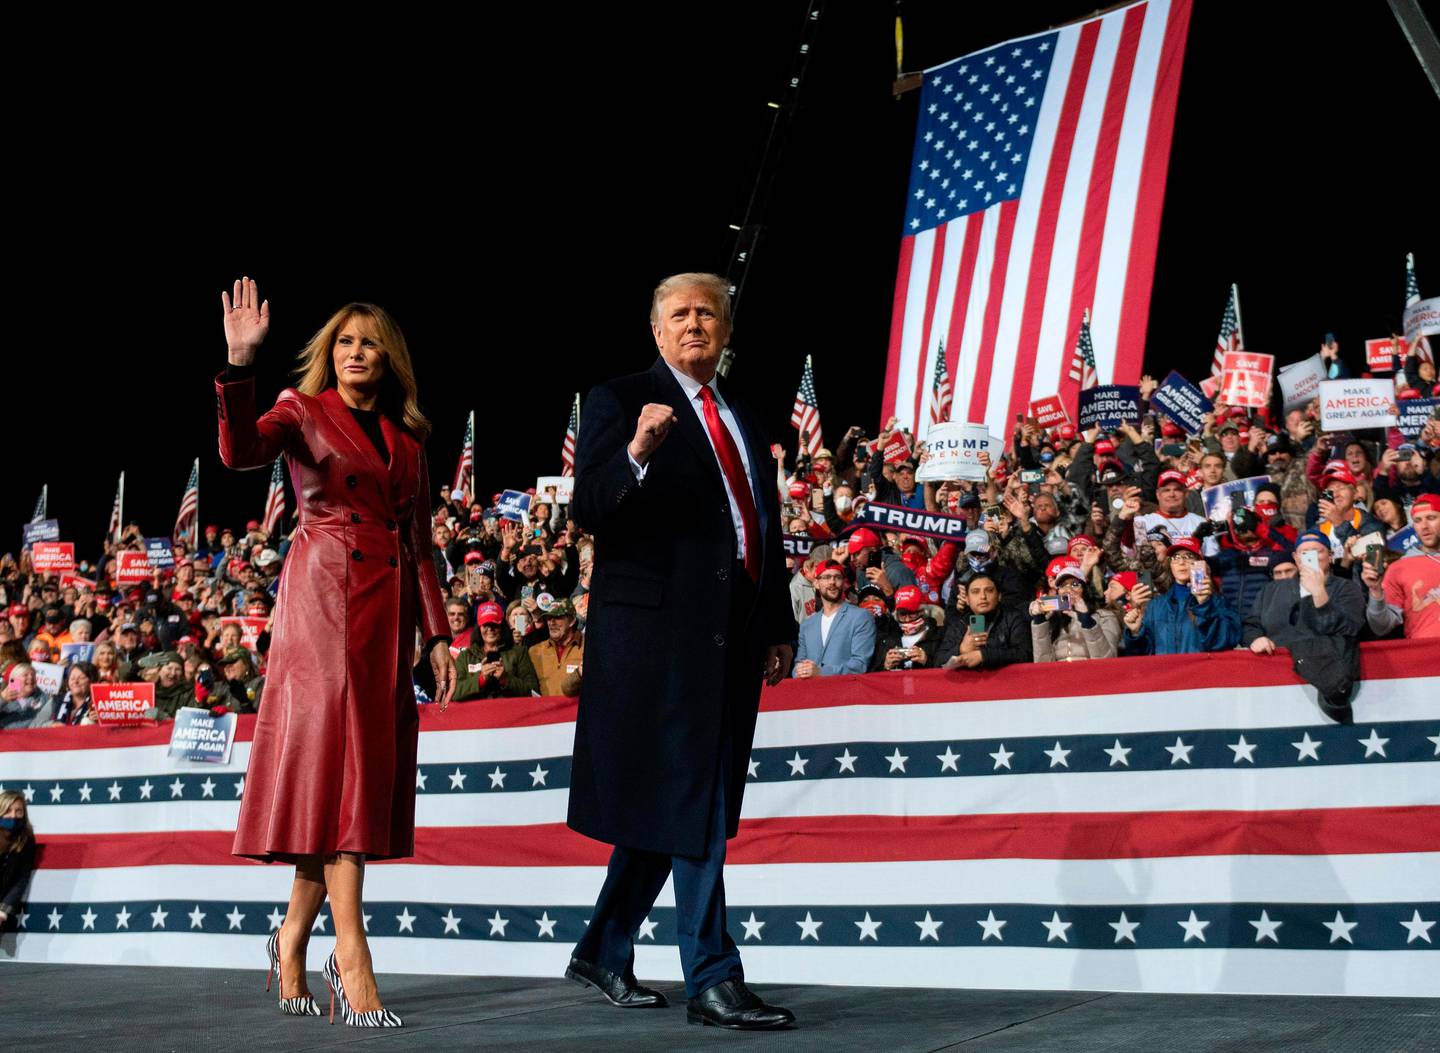 US President Donald Trump leaves the stage with First Lady Melania Trump at the end of a rally to support Republican Senate candidates at Valdosta Regional Airport in Valdosta, Georgia on December 5, 2020. - President Donald Trump ventures out of Washington on Saturday for his first political appearance since his election defeat to Joe Biden, campaigning in Georgia where two run-off races will decide the fate of the US Senate. (Photo by ANDREW CABALLERO-REYNOLDS / AFP)